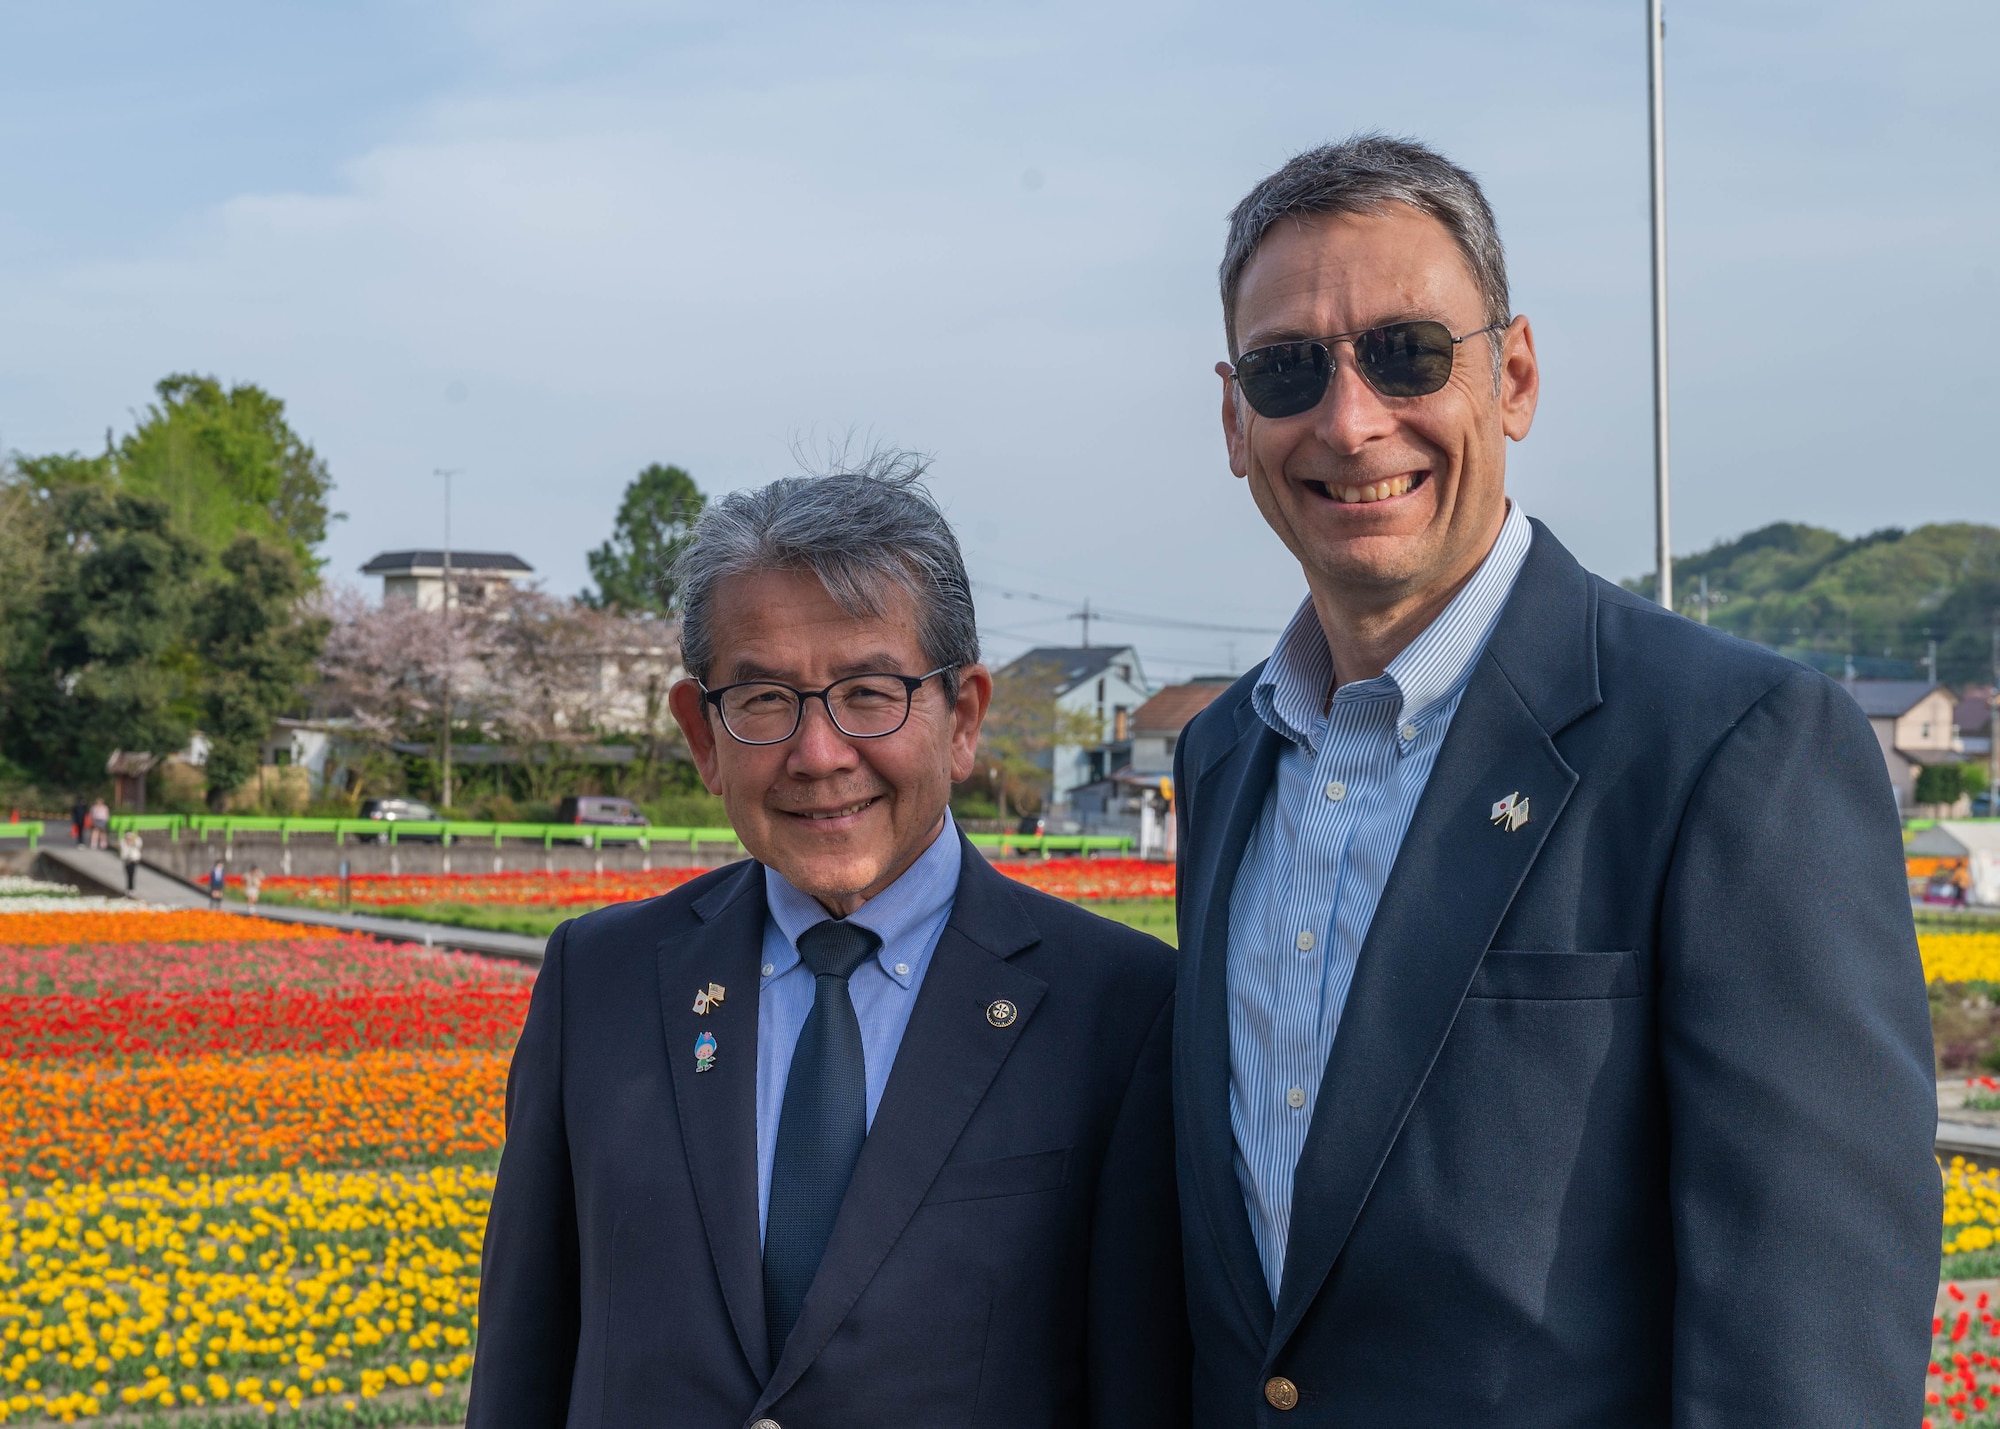 Two men pose for a photo in front of a field of tulips.